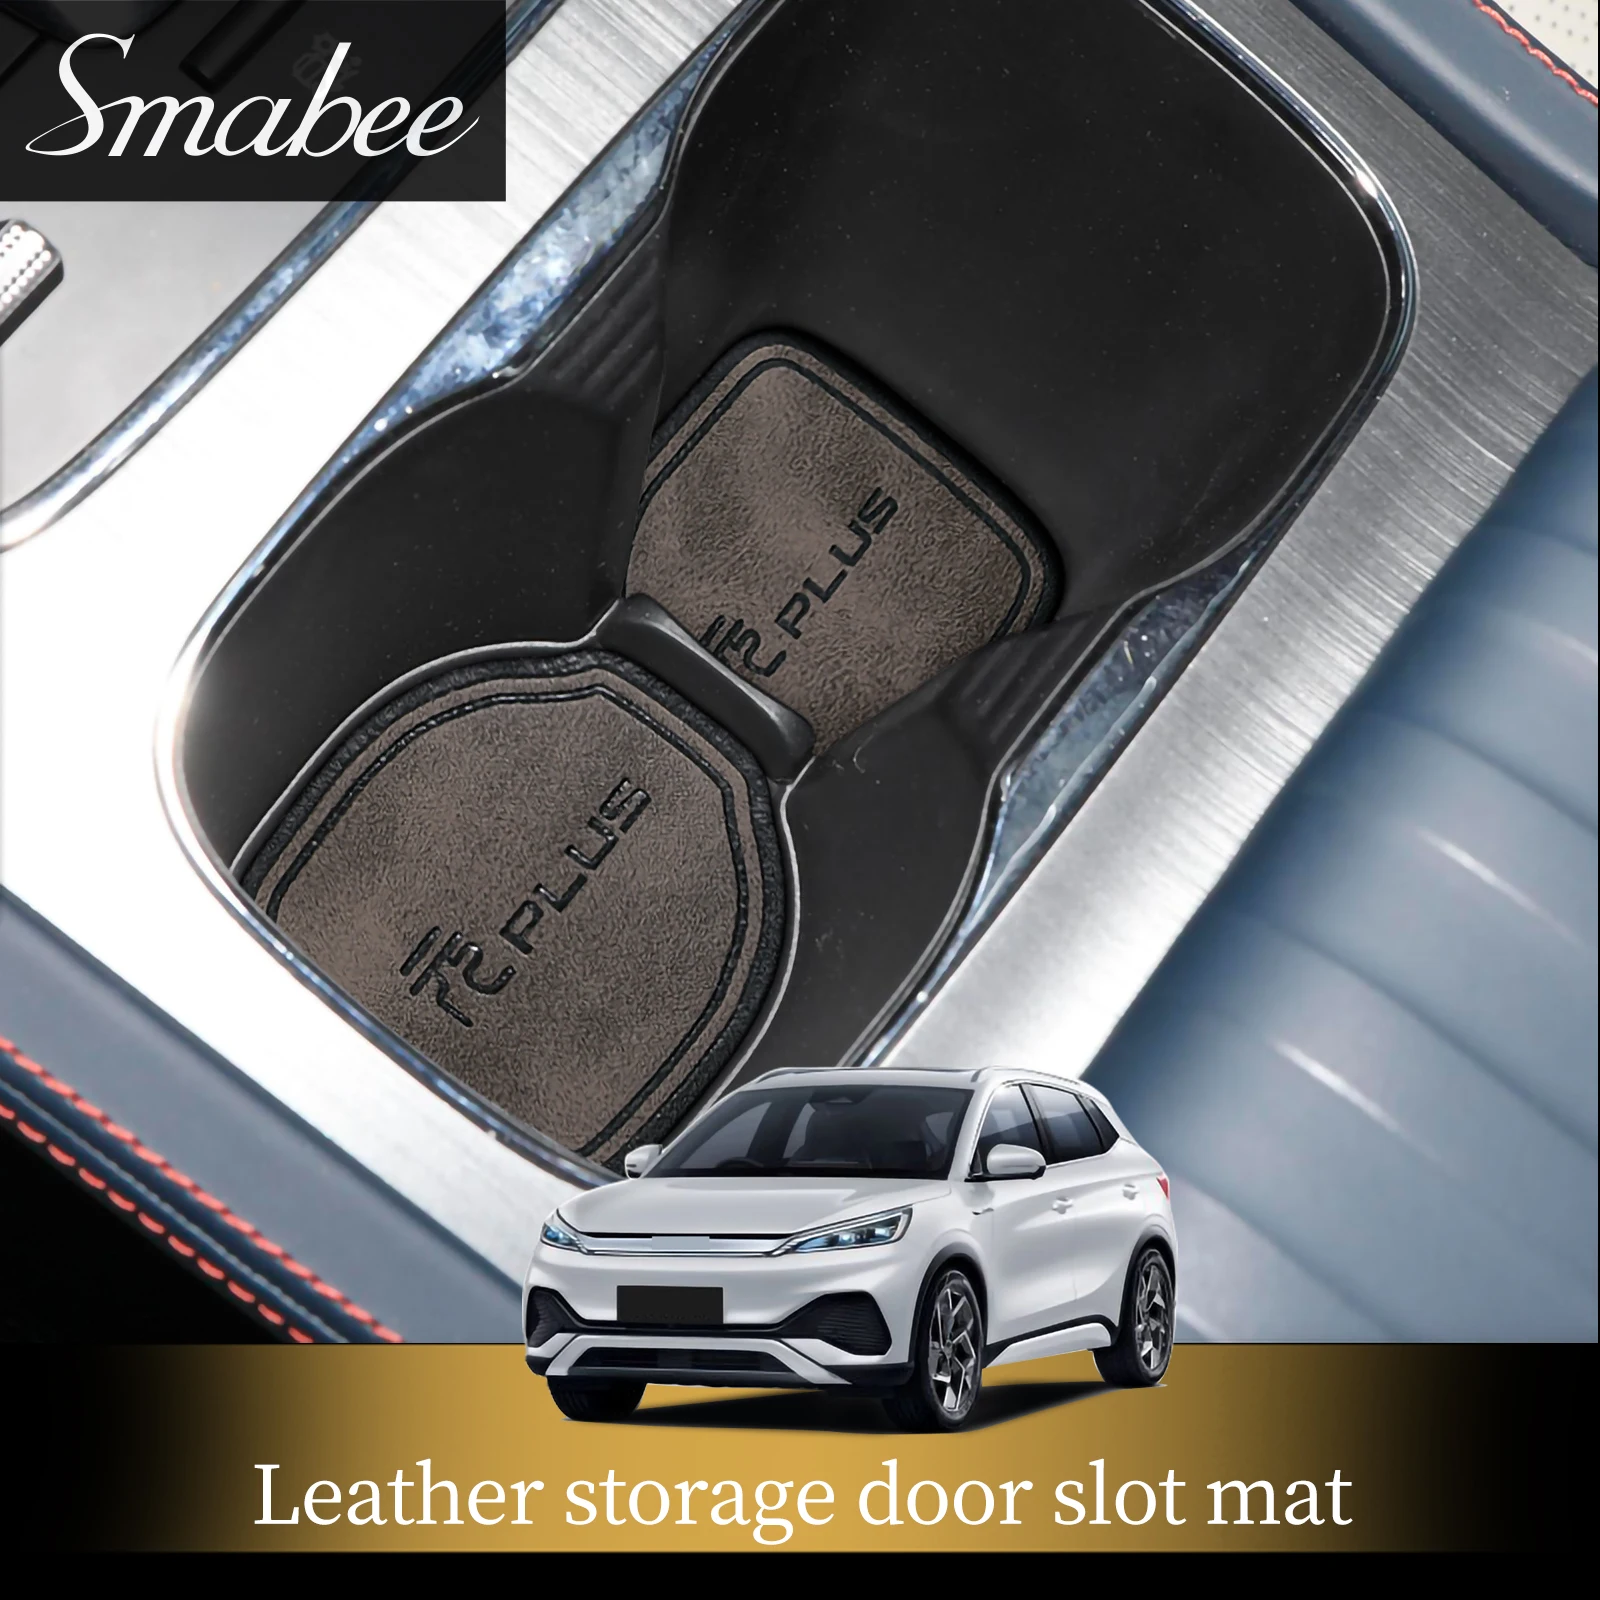 

Smabee Leather Gate Slot Mat for BYD Atto 3 Car Cortex Door Groove Pad Cup Holder Interior Accessories Water Coaster Storage